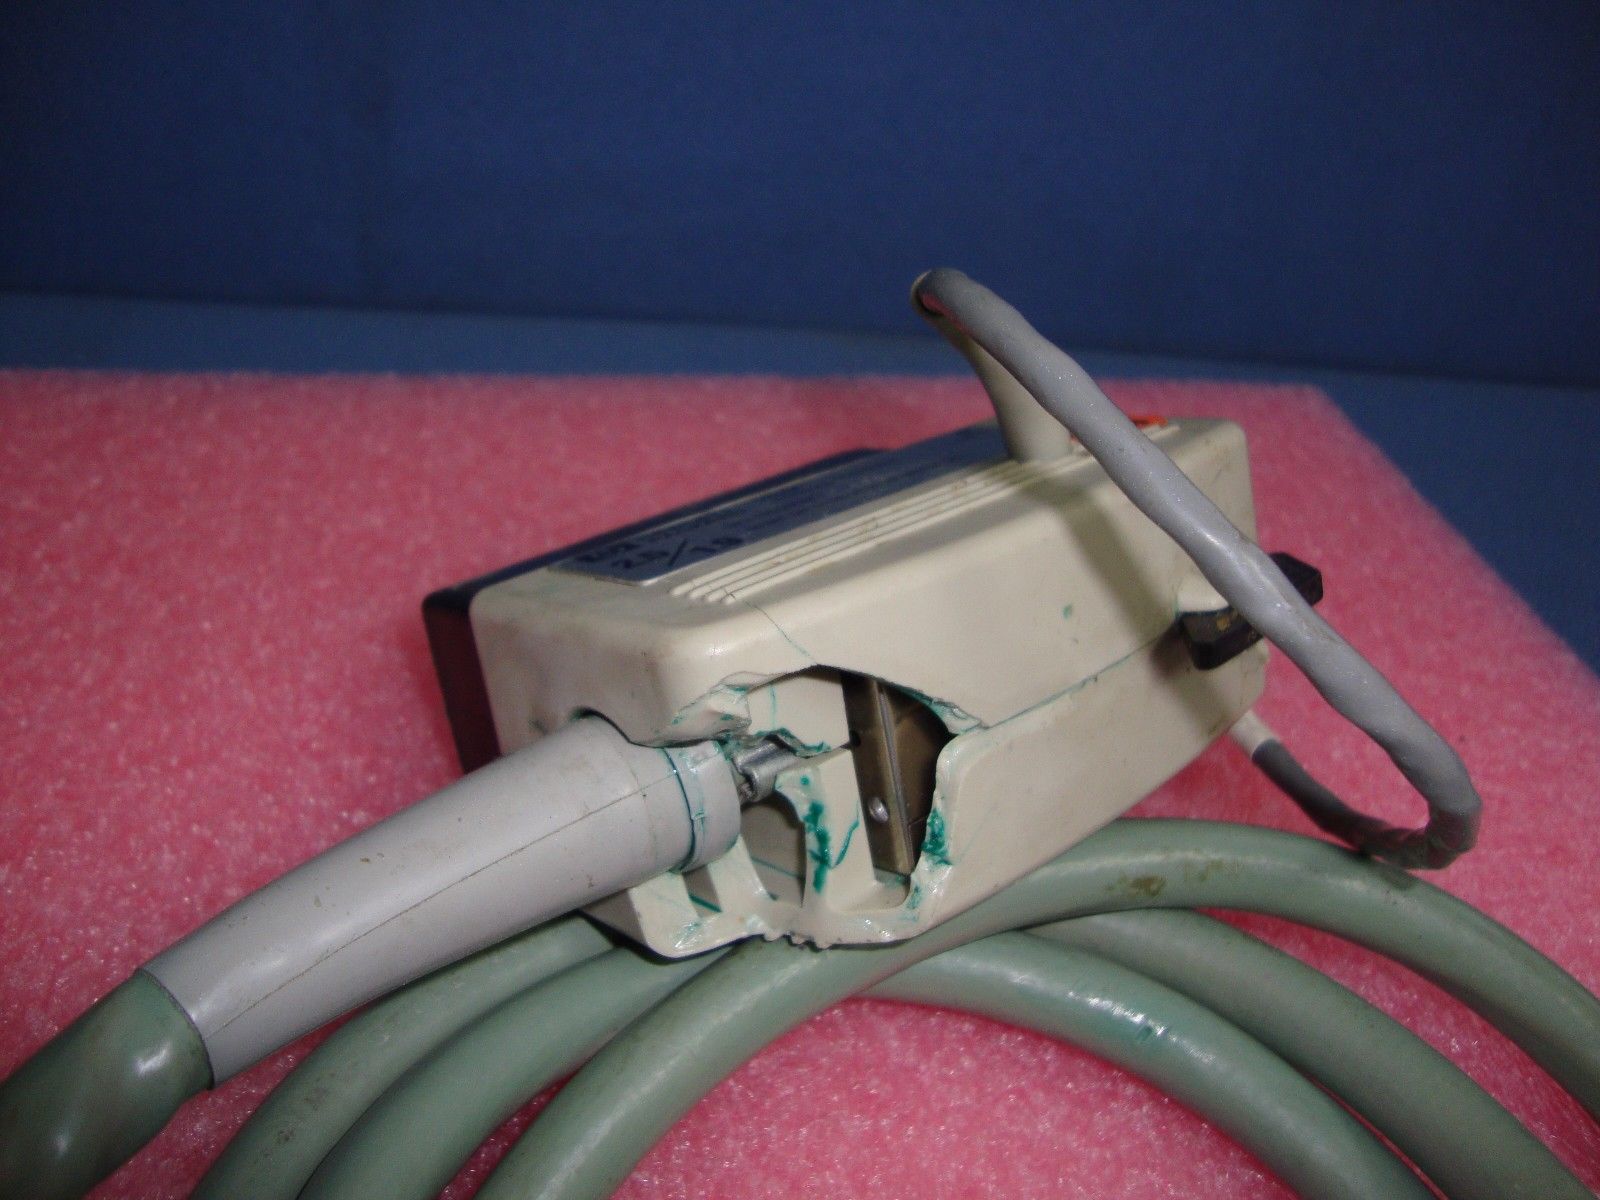 a cord connected to an electrical device on a pink surface